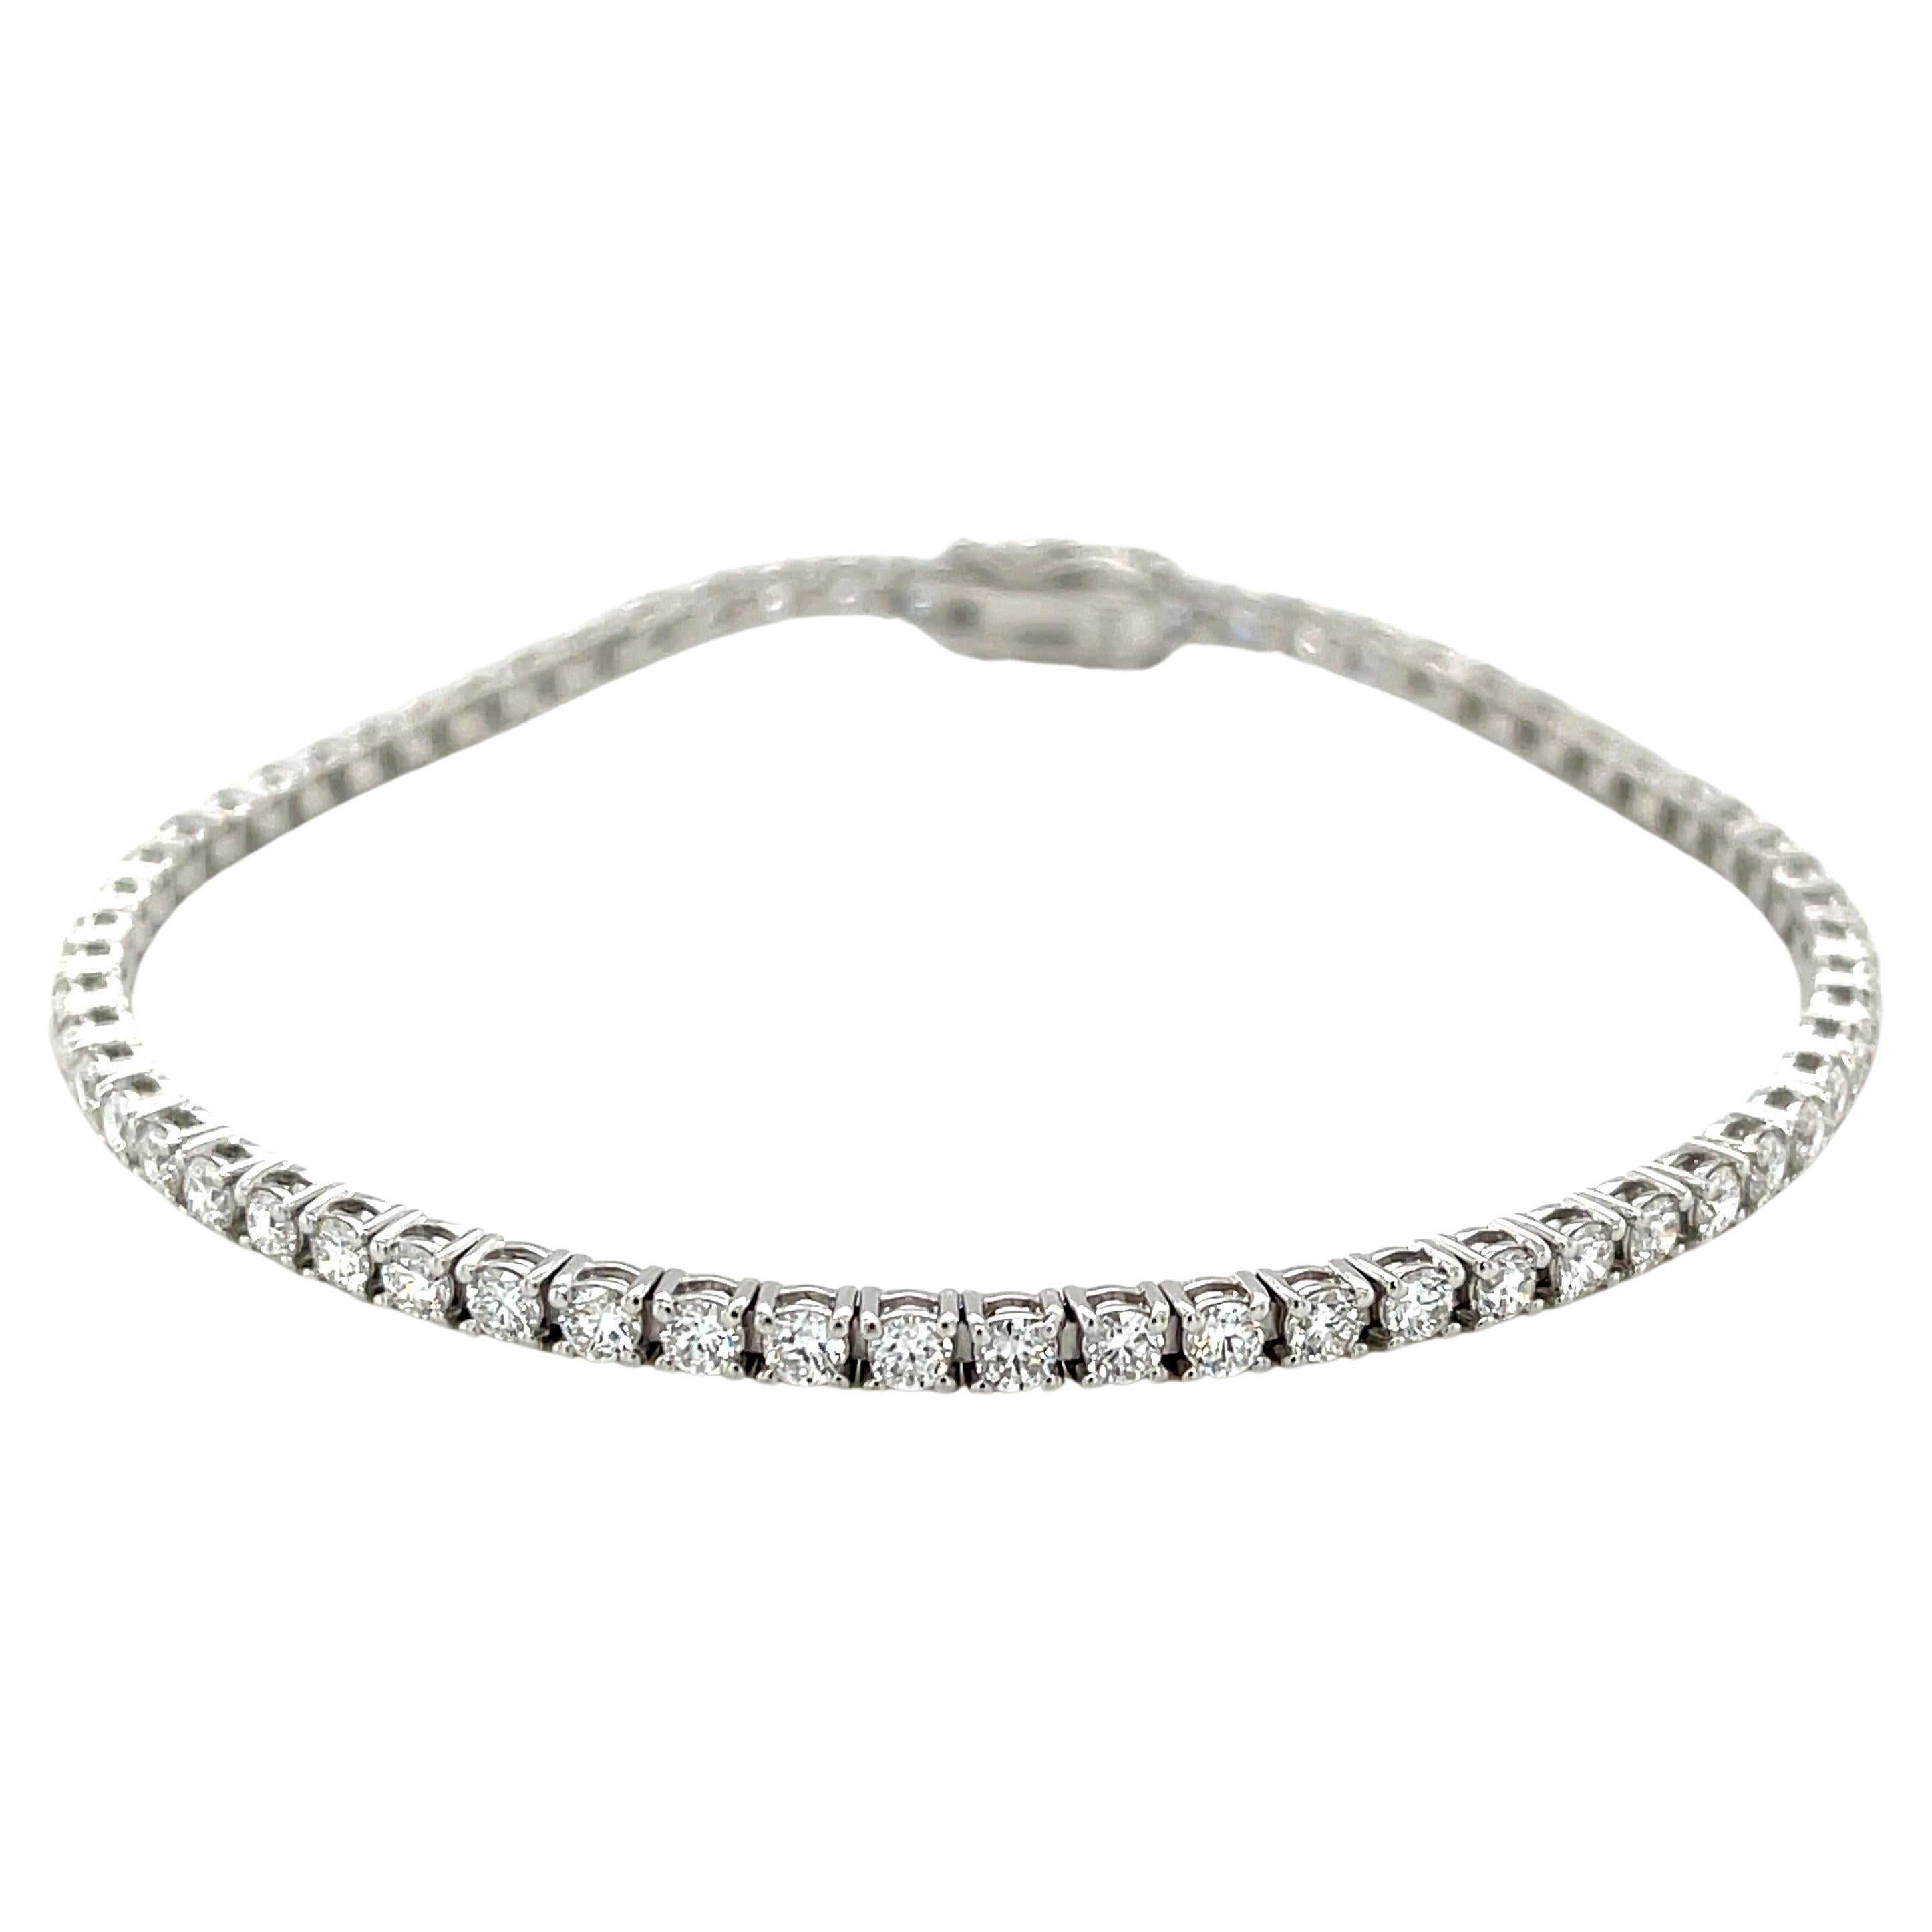 Diamond and 18k White Gold Tennis Bracelet, 2.94 Carats Total  For Sale